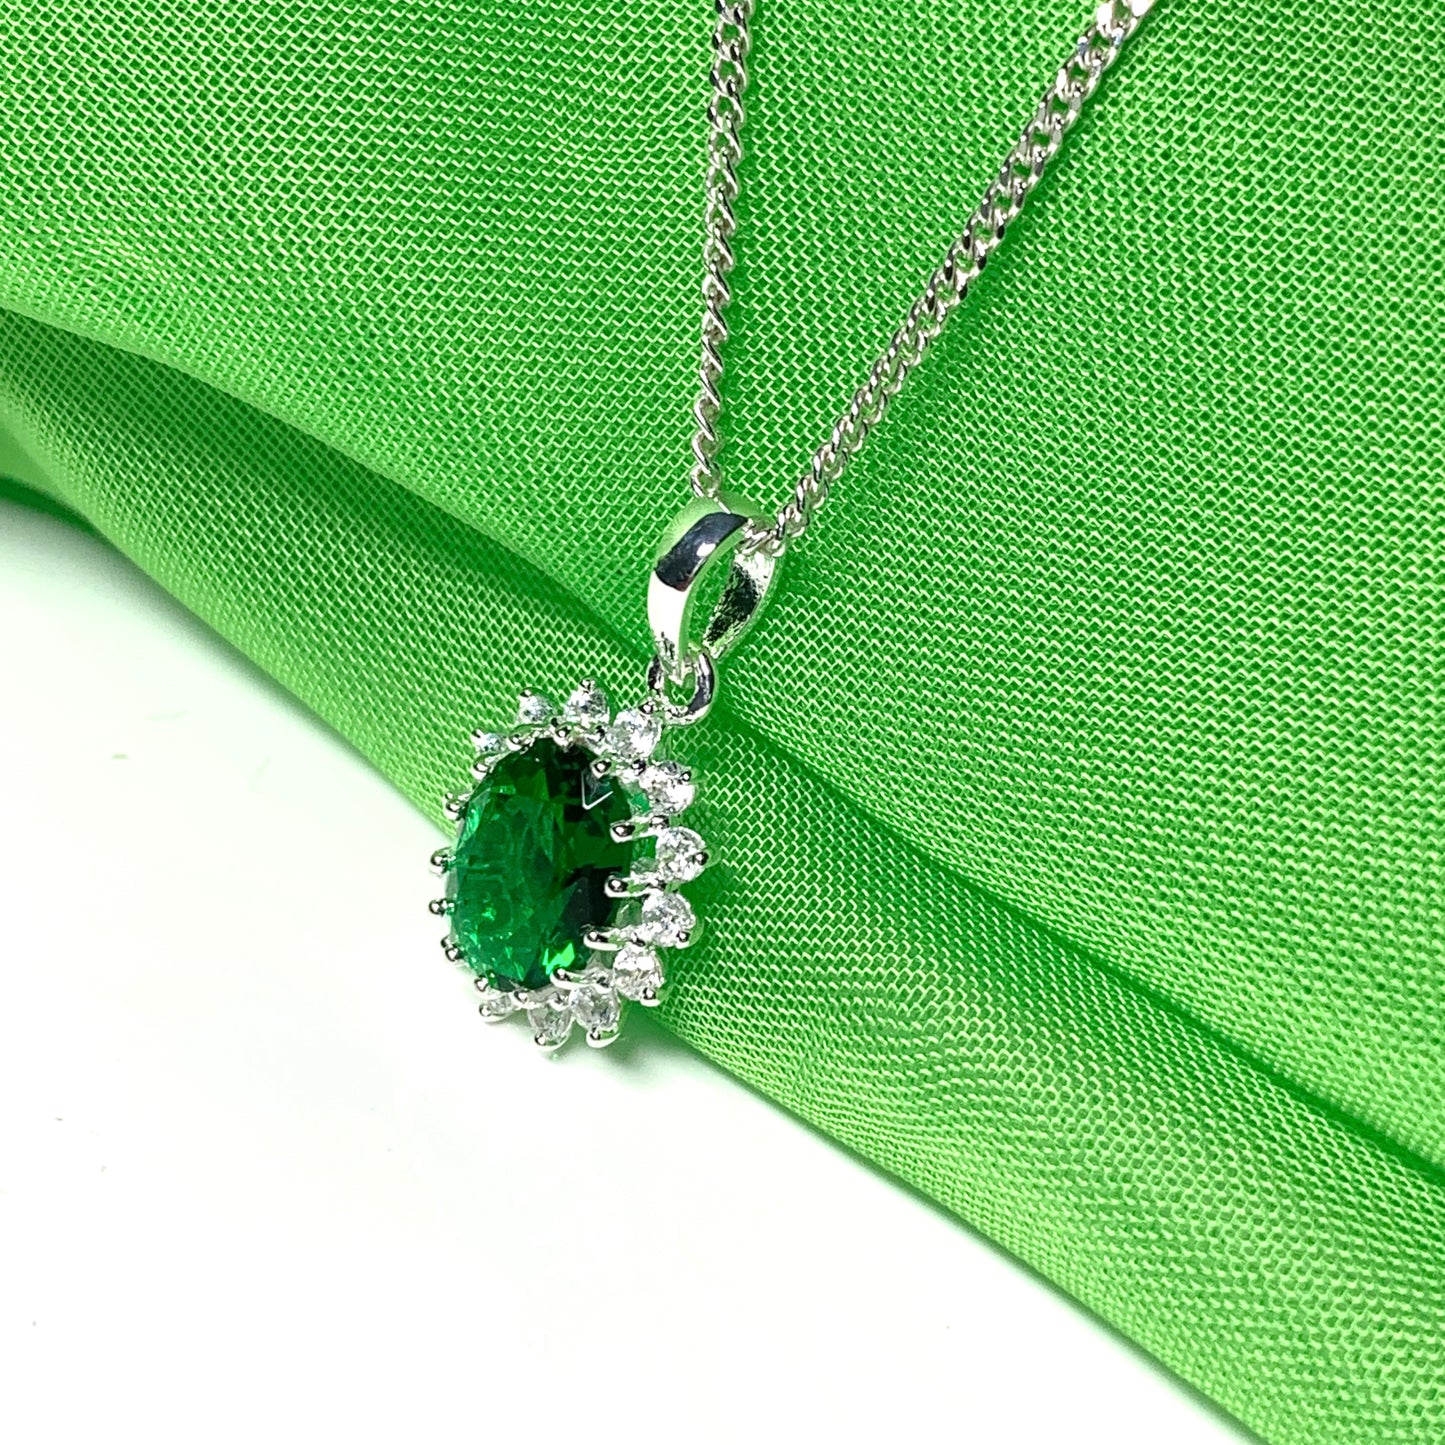 Large pendant bright green and white cubic zirconia oval cluster dress cocktail necklace